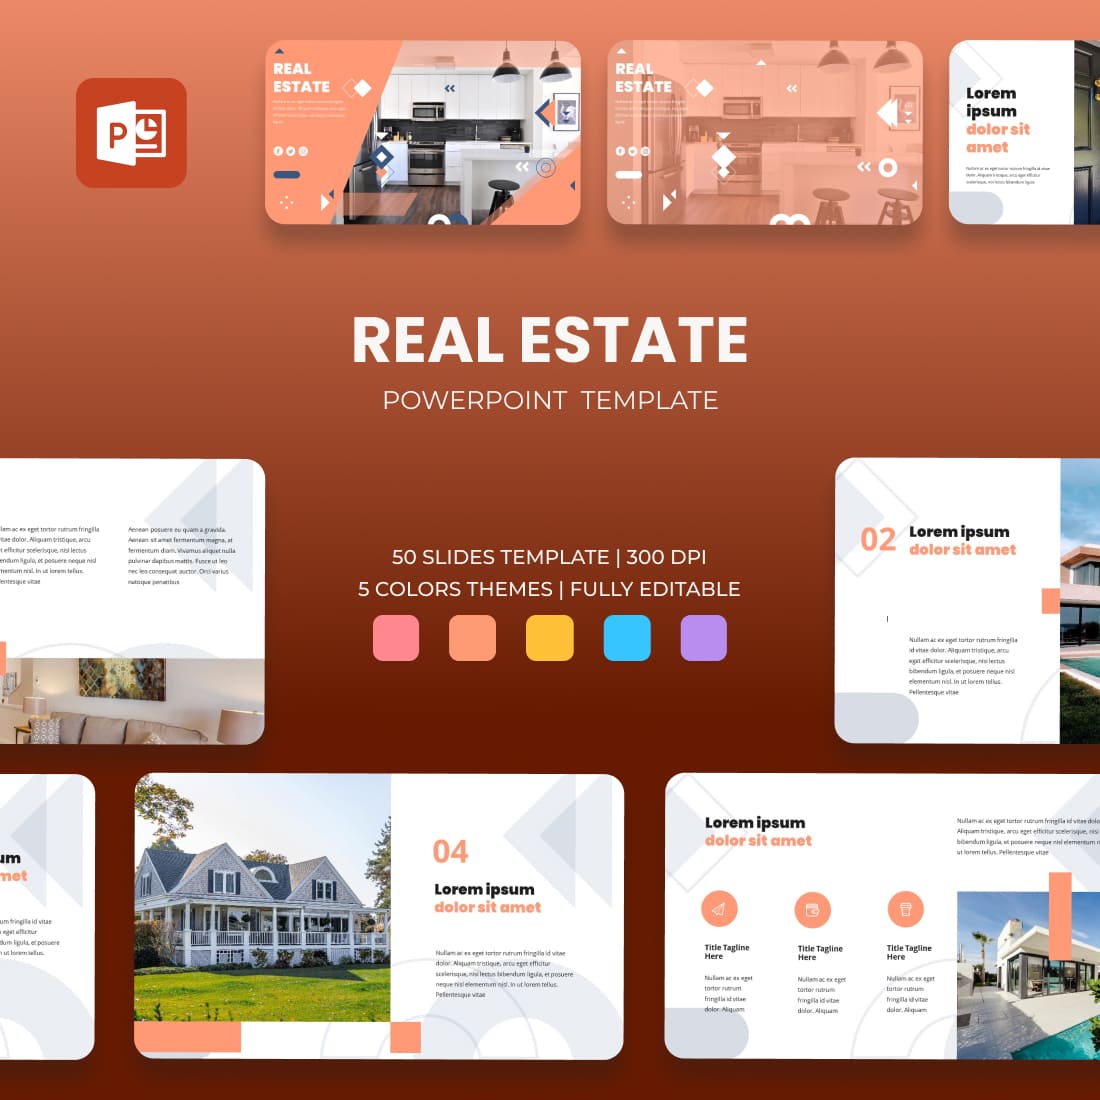 Real Estate Powerpoint Template.